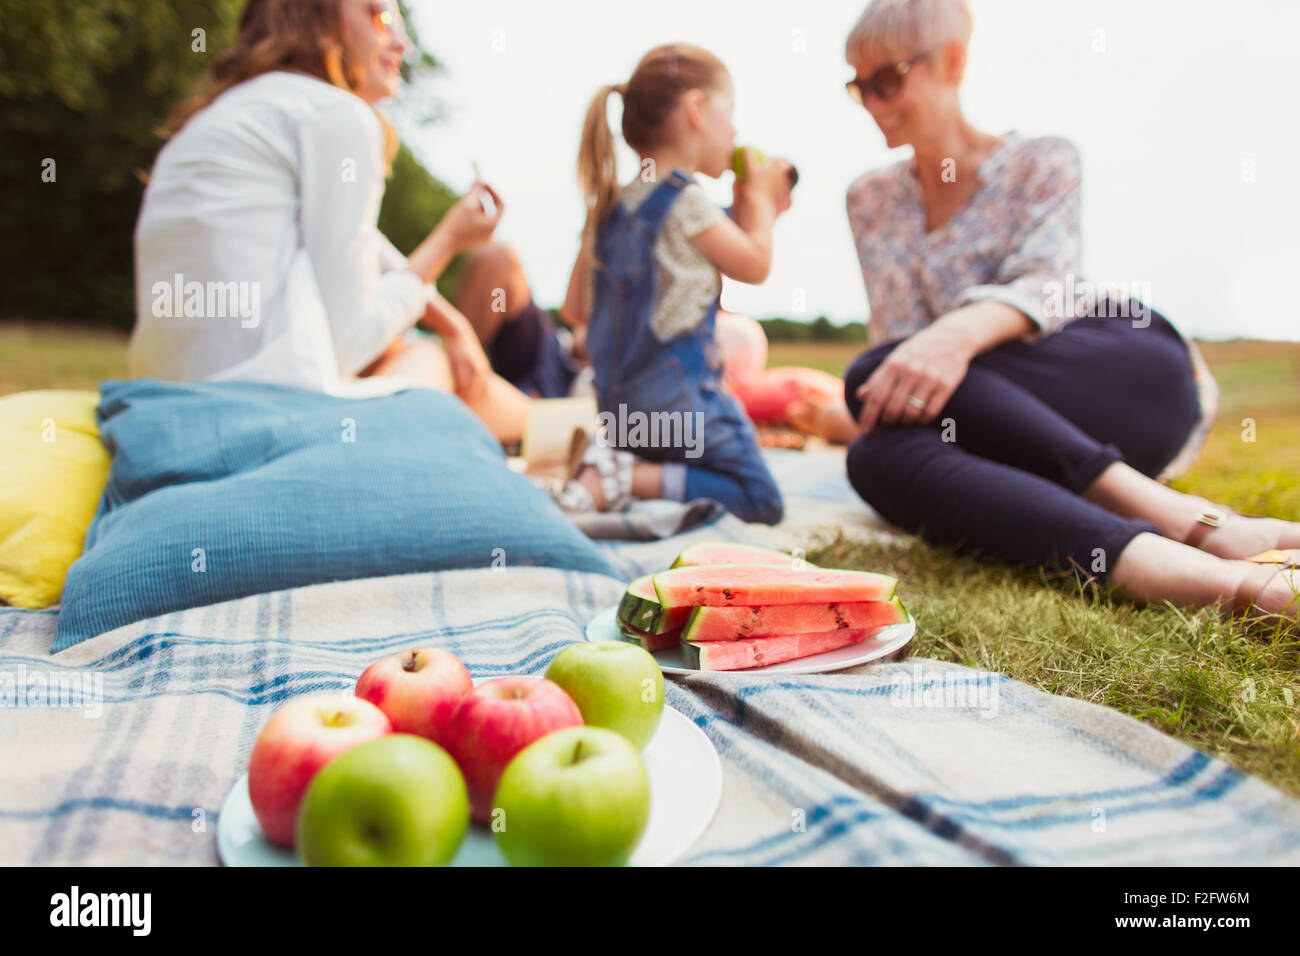 Apples and watermelon on picnic blanket near multi-generation family Stock Photo